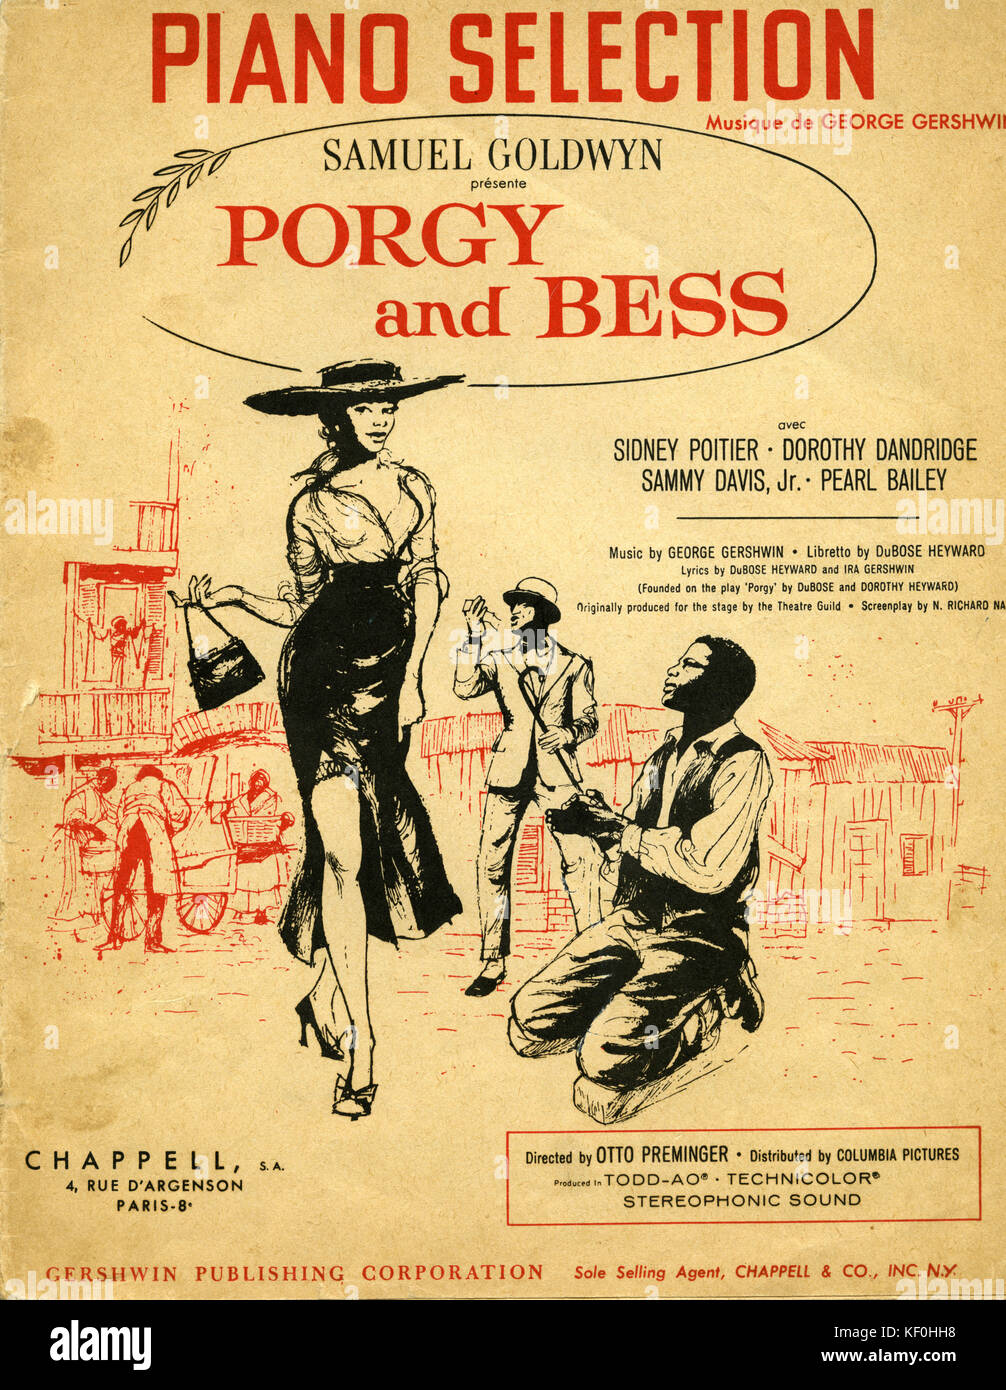 Porgy and Bess, cover of piano score of film version, music by George Gershwin, libretto by DuBose Heyward.  Film directed by Otto Preminger. Starring Sidney Poitier, Dorothy Dandridge, Sammy Davis Jr. GG, American composer & pianist, 26th September 1898 - 11th July 1937. Stock Photo